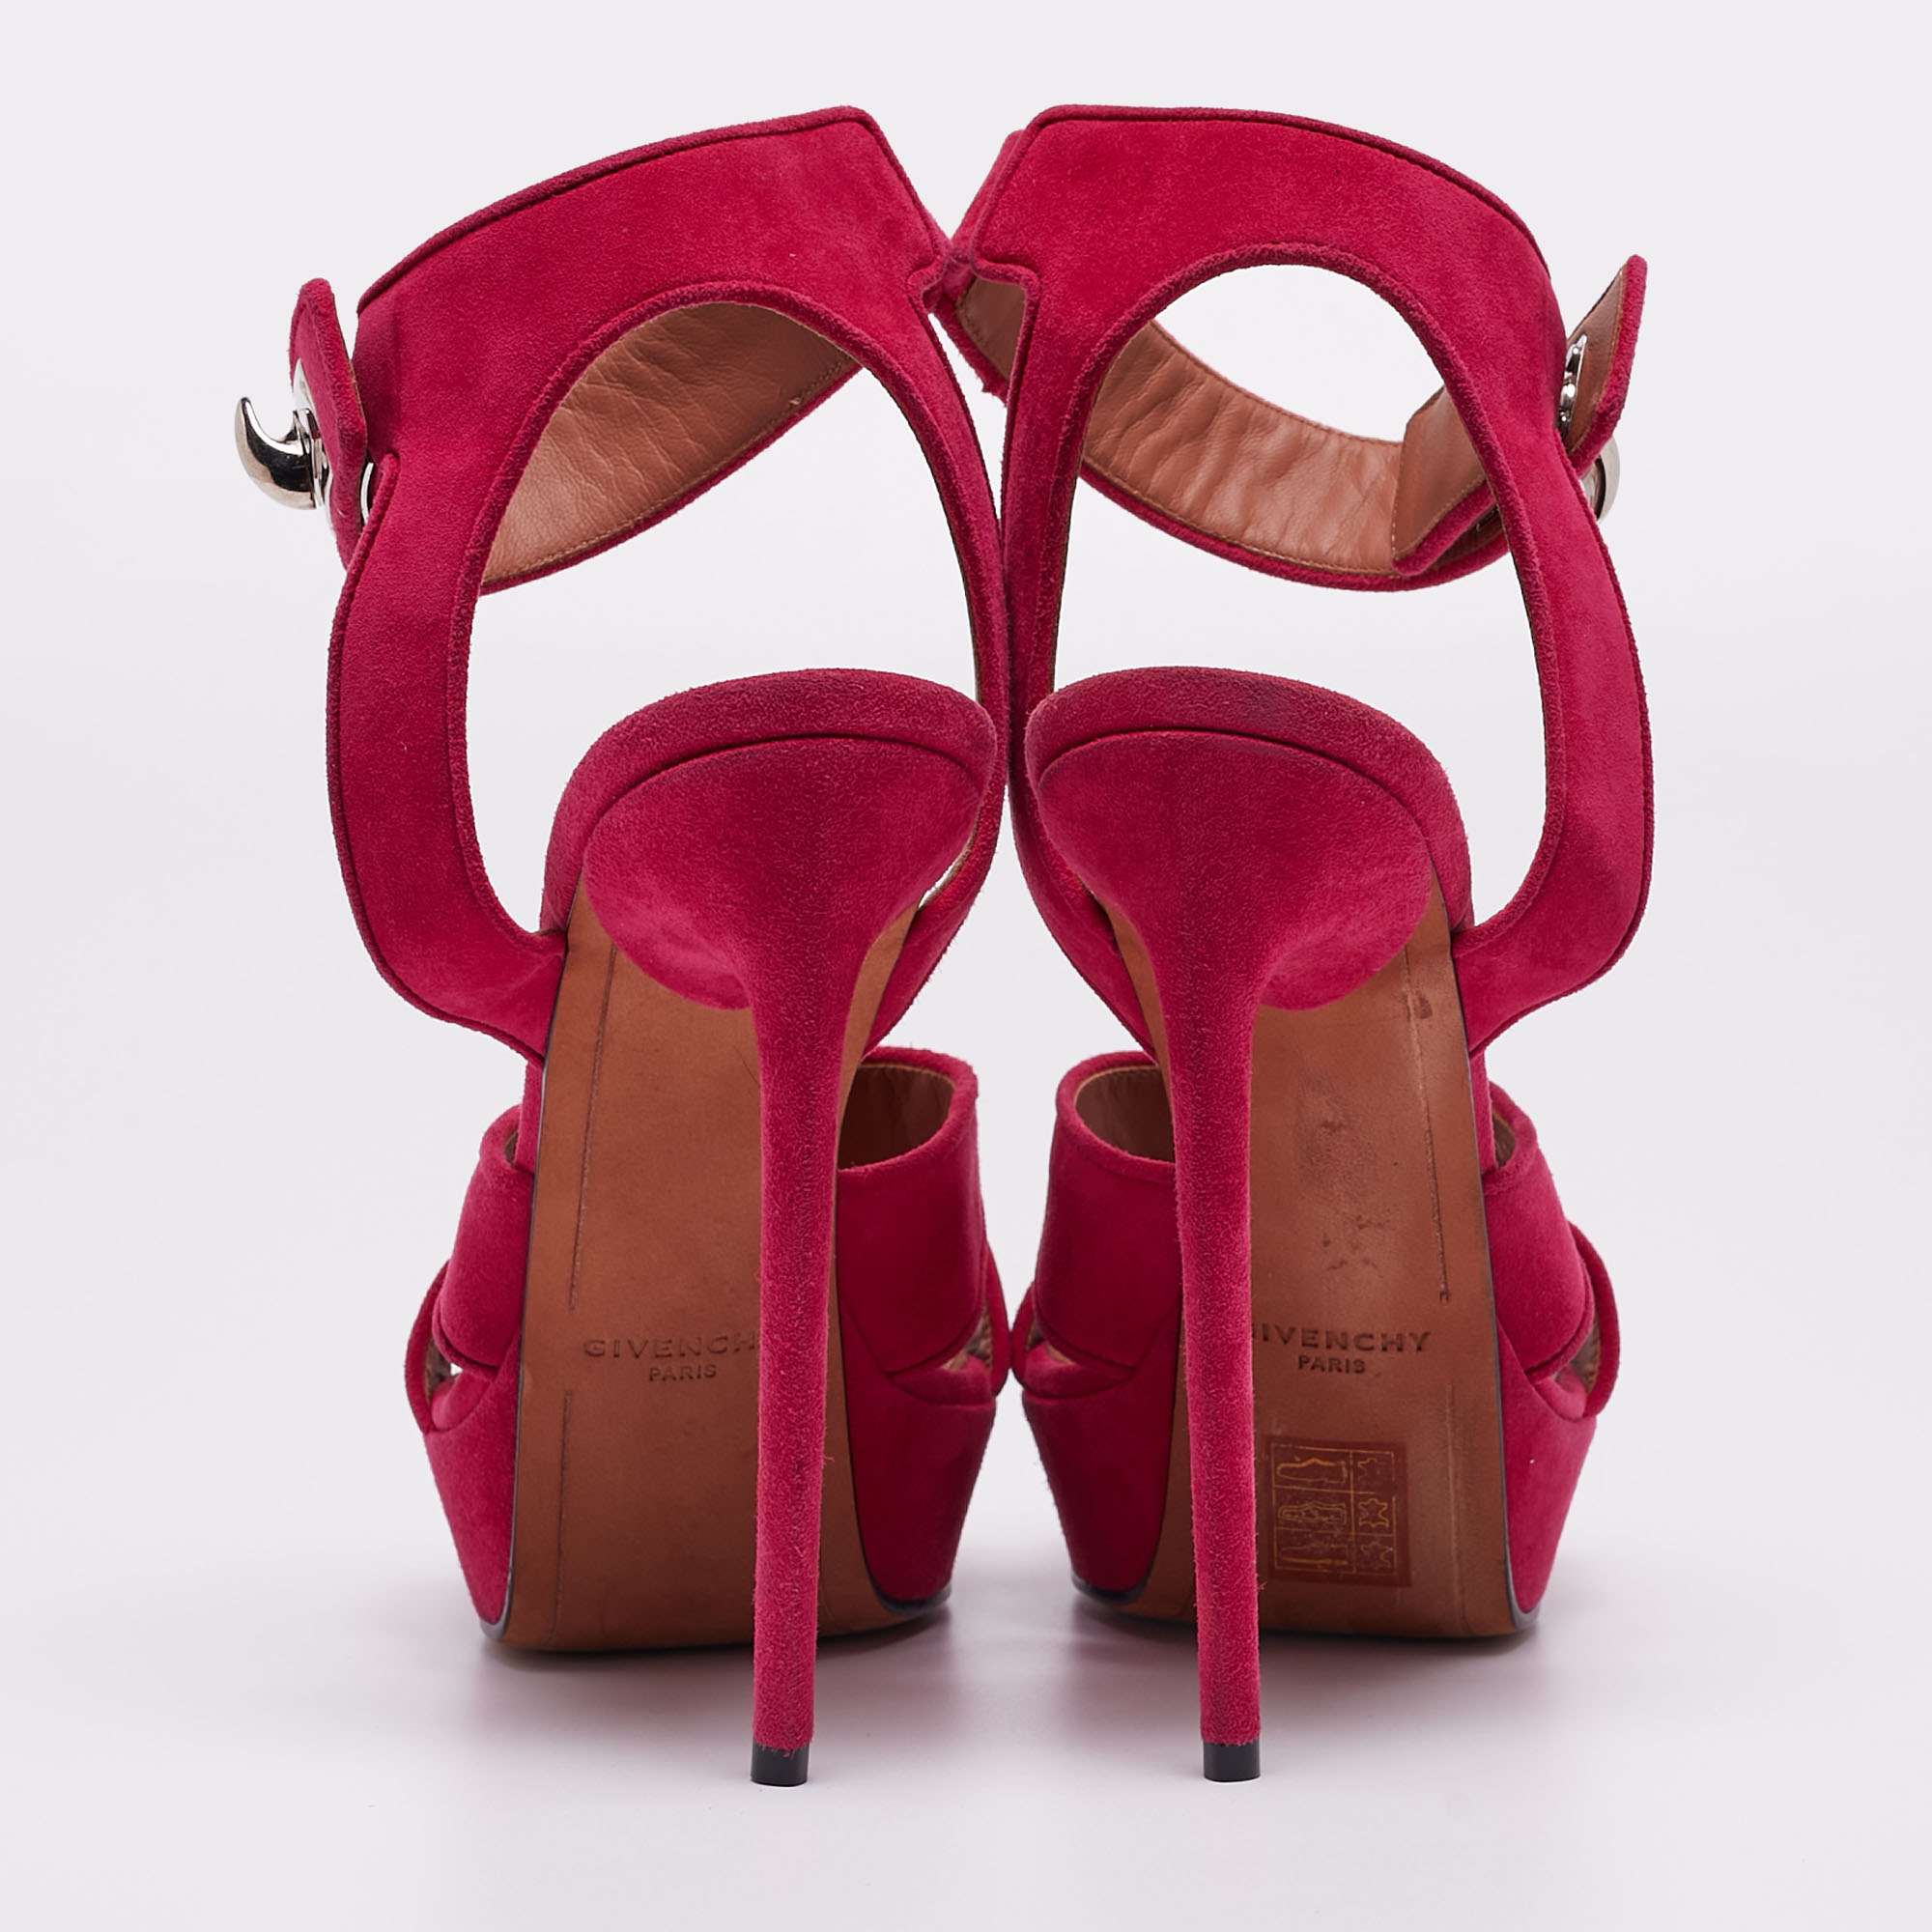 Givenchy Fuchsia Suede Shark Tooth Ankle Strap Platform Sandals Size 40